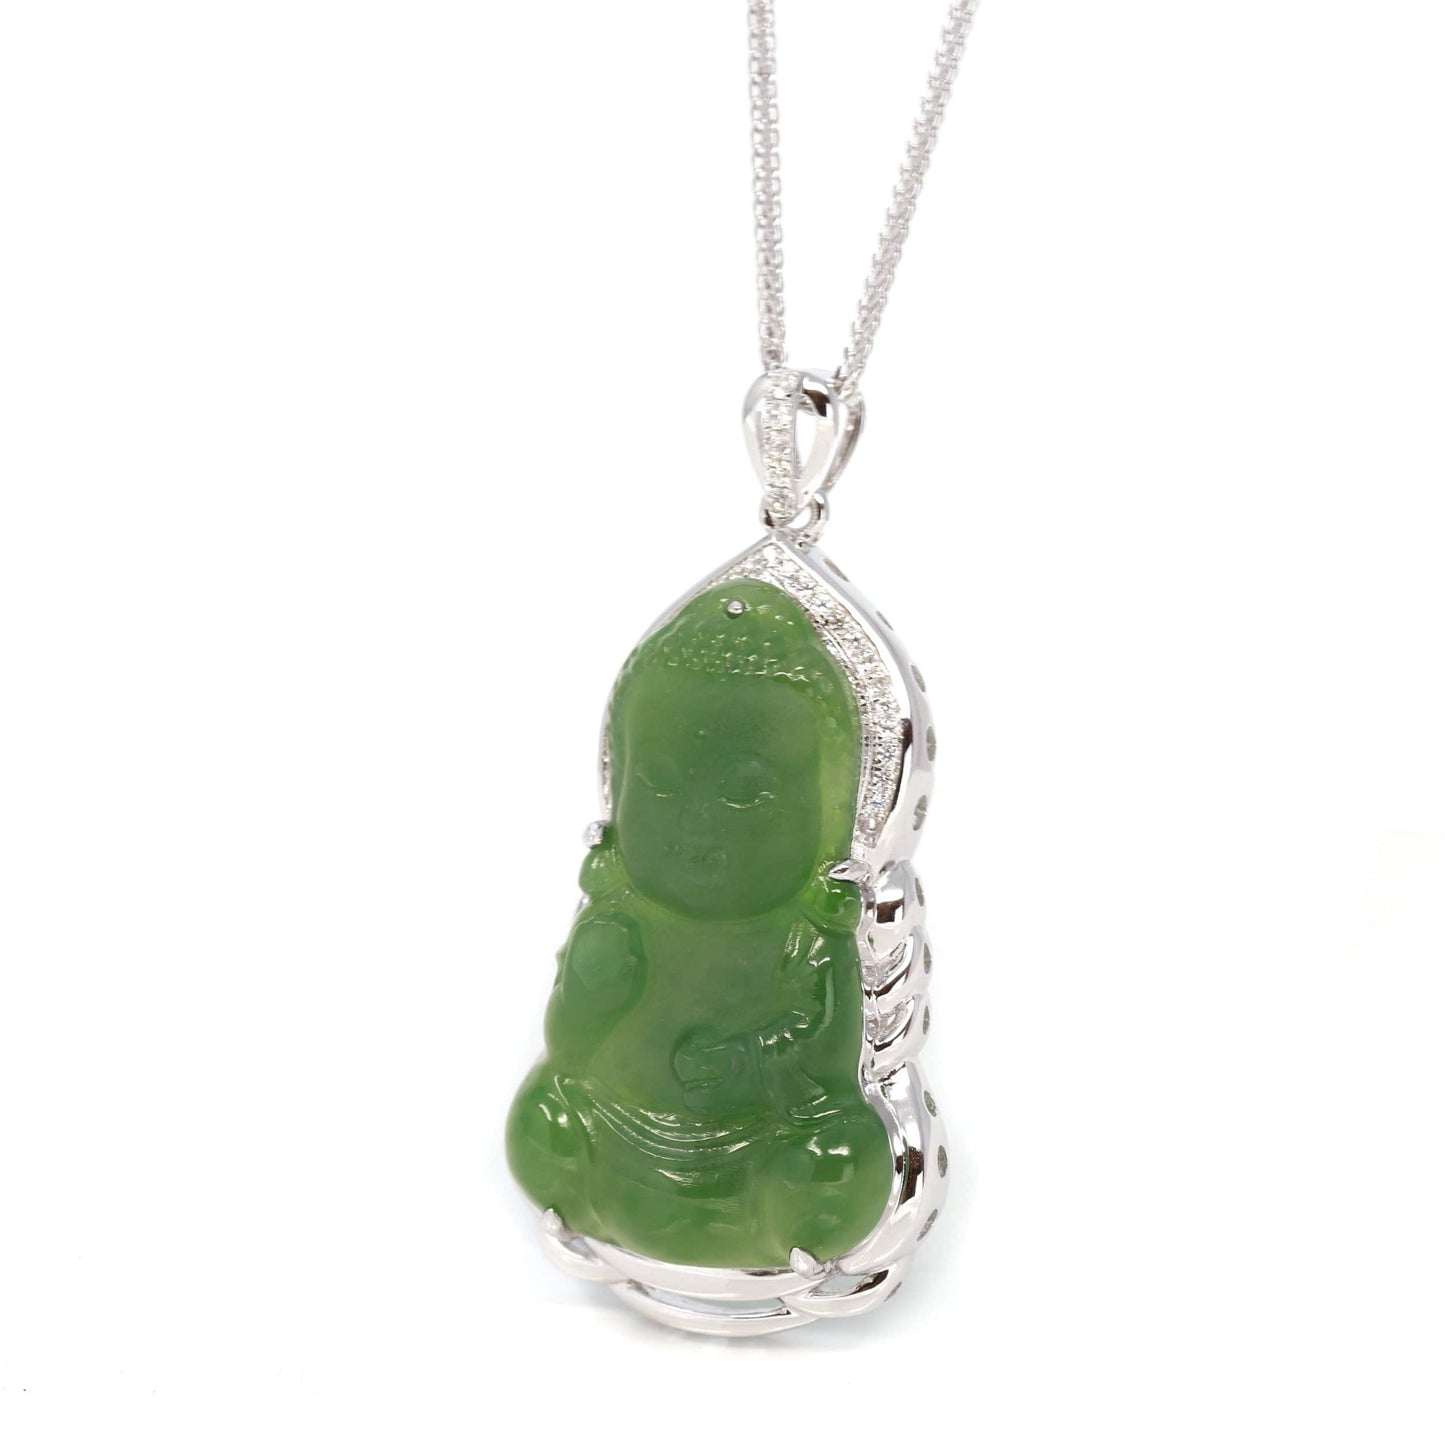 Balance” Green Jade, Nephrite Pendant Gift for Women – Large – Crystal  boutique